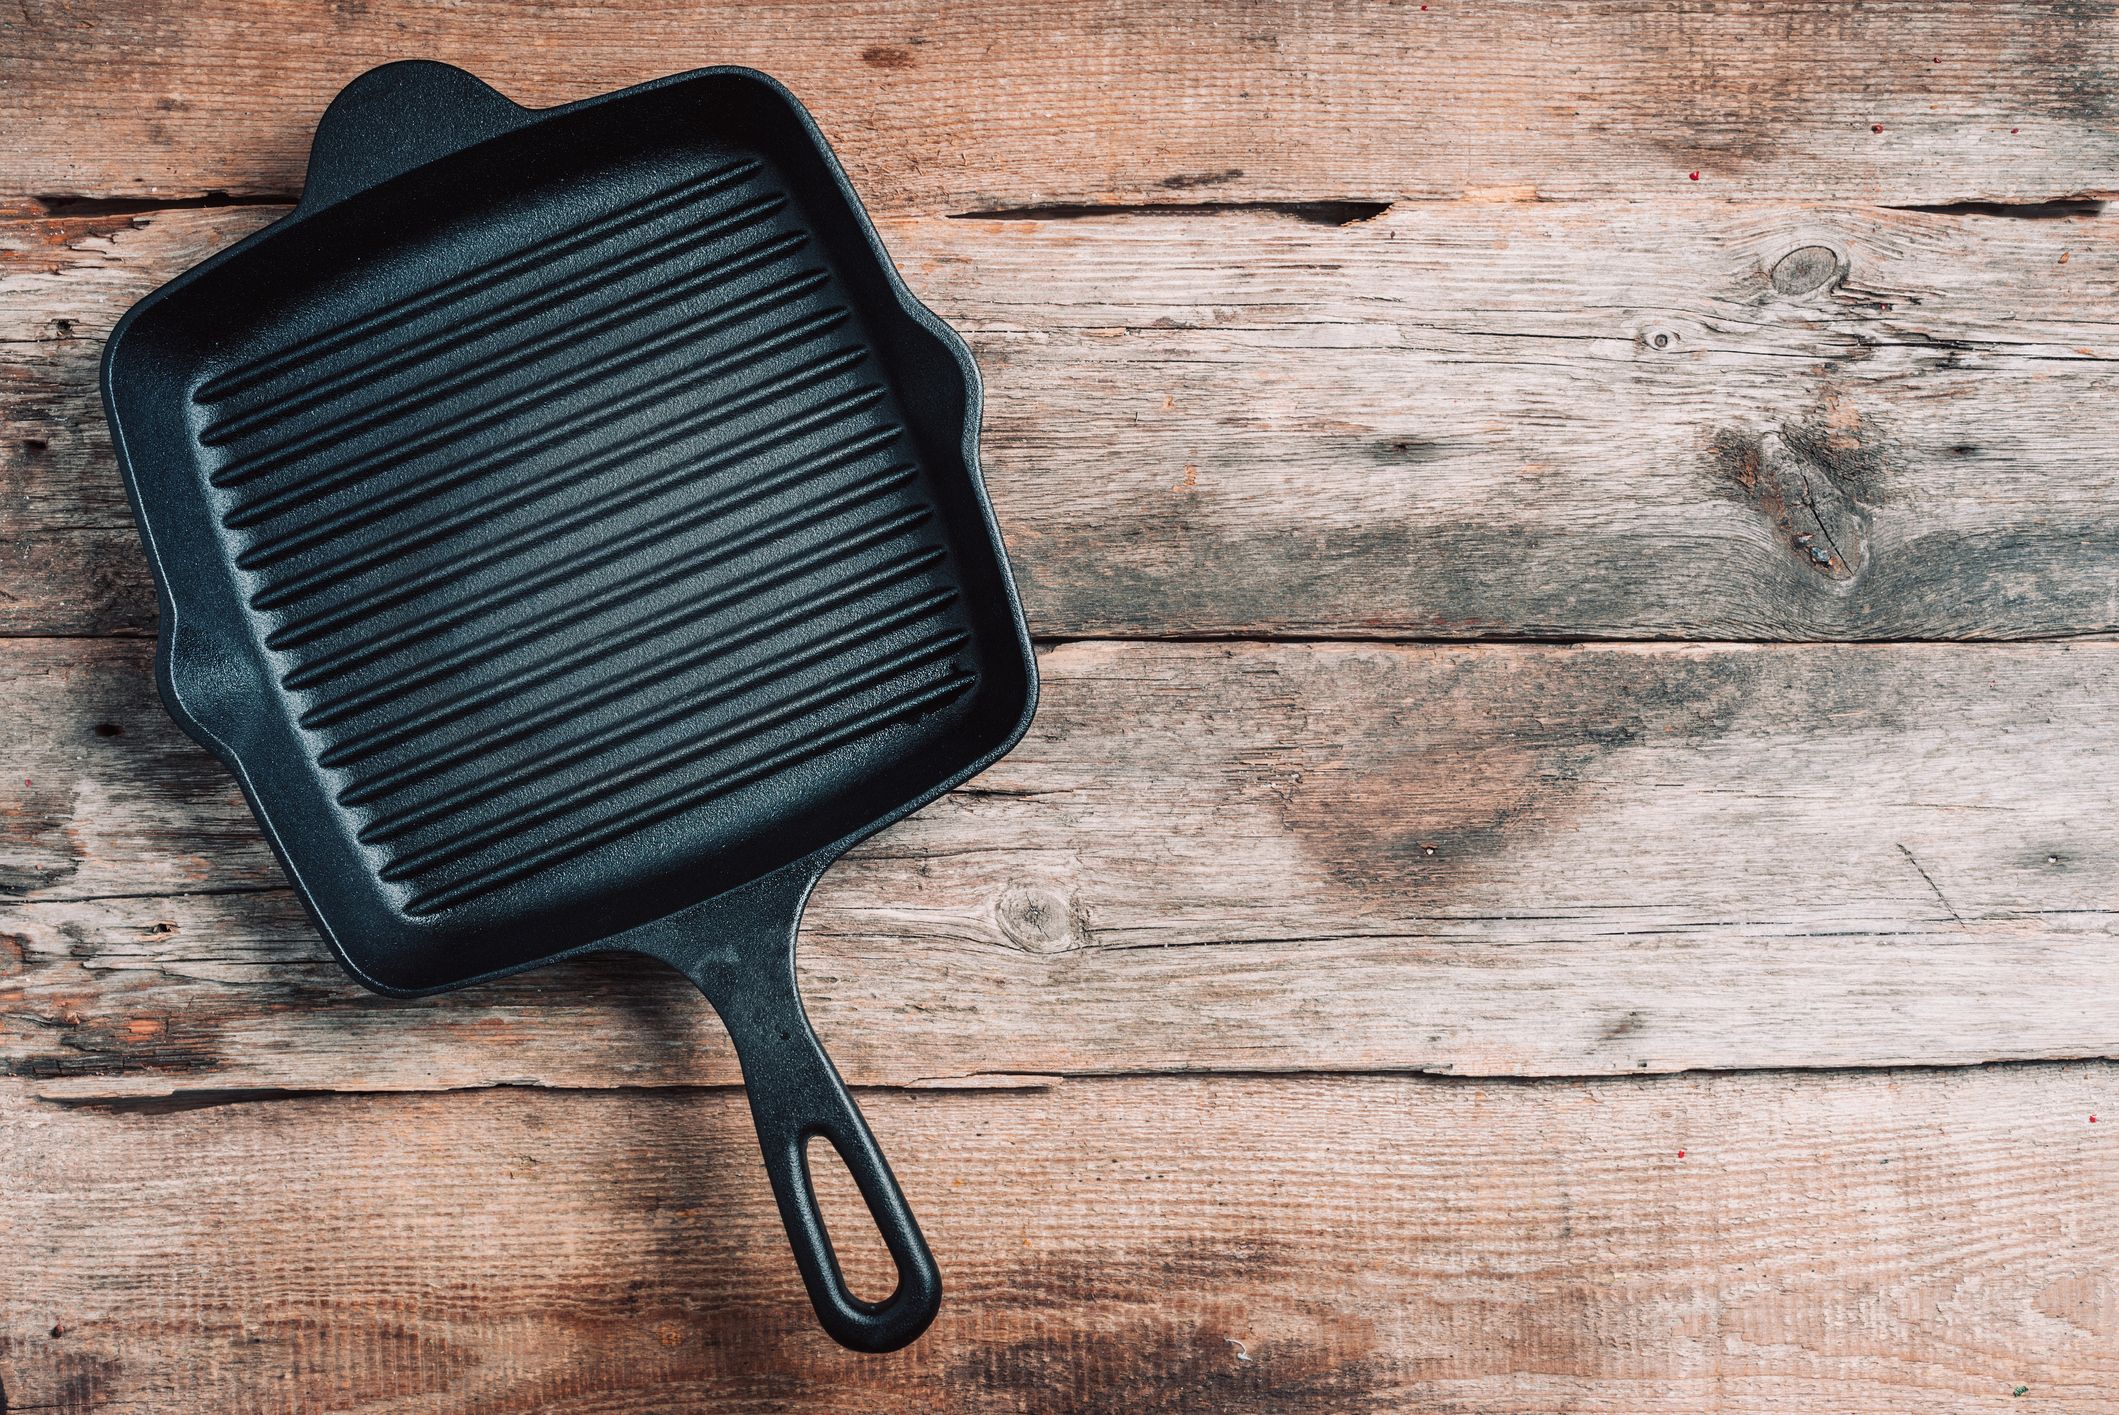 https://hips.hearstapps.com/hmg-prod/images/empty-grill-iron-pan-on-wooden-background-top-view-royalty-free-image-1599677468.jpg